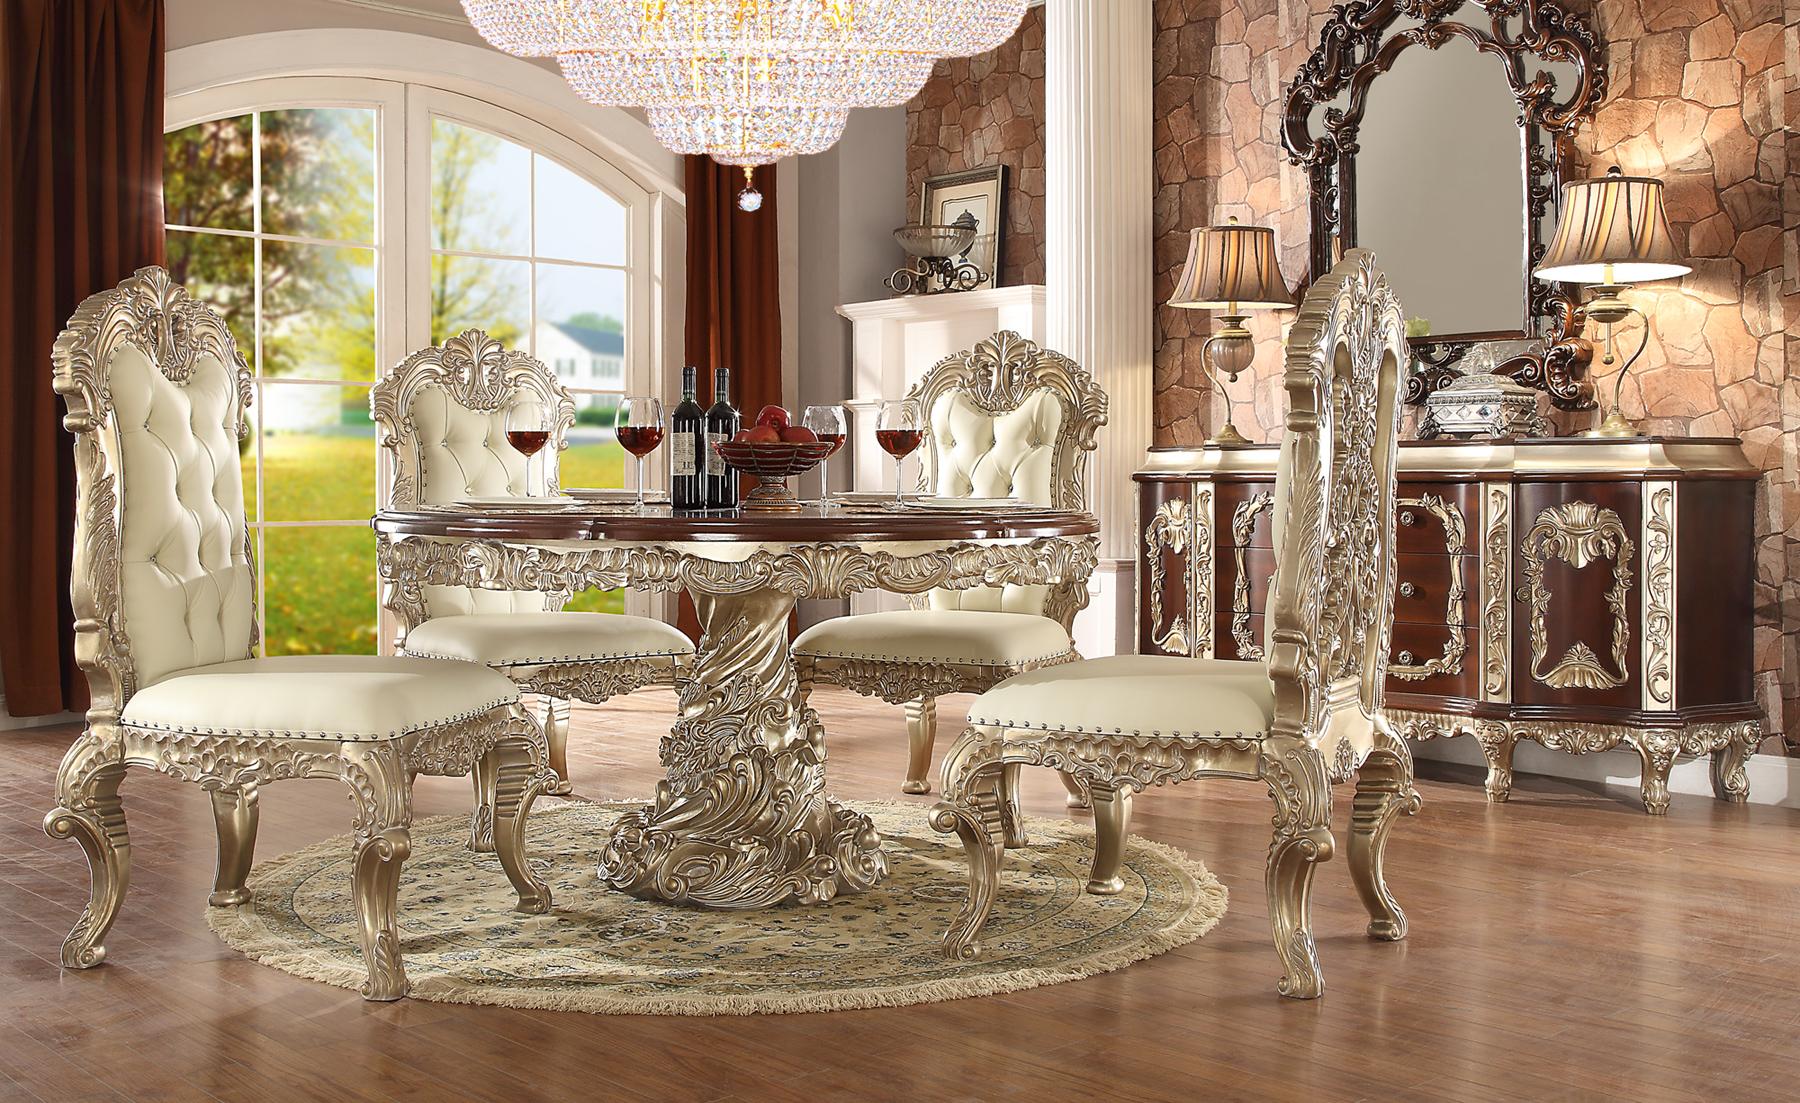 Traditional Dining Room Set HD-8017 HD-8017-RTSET5 in Antique White, Silver Faux Leather